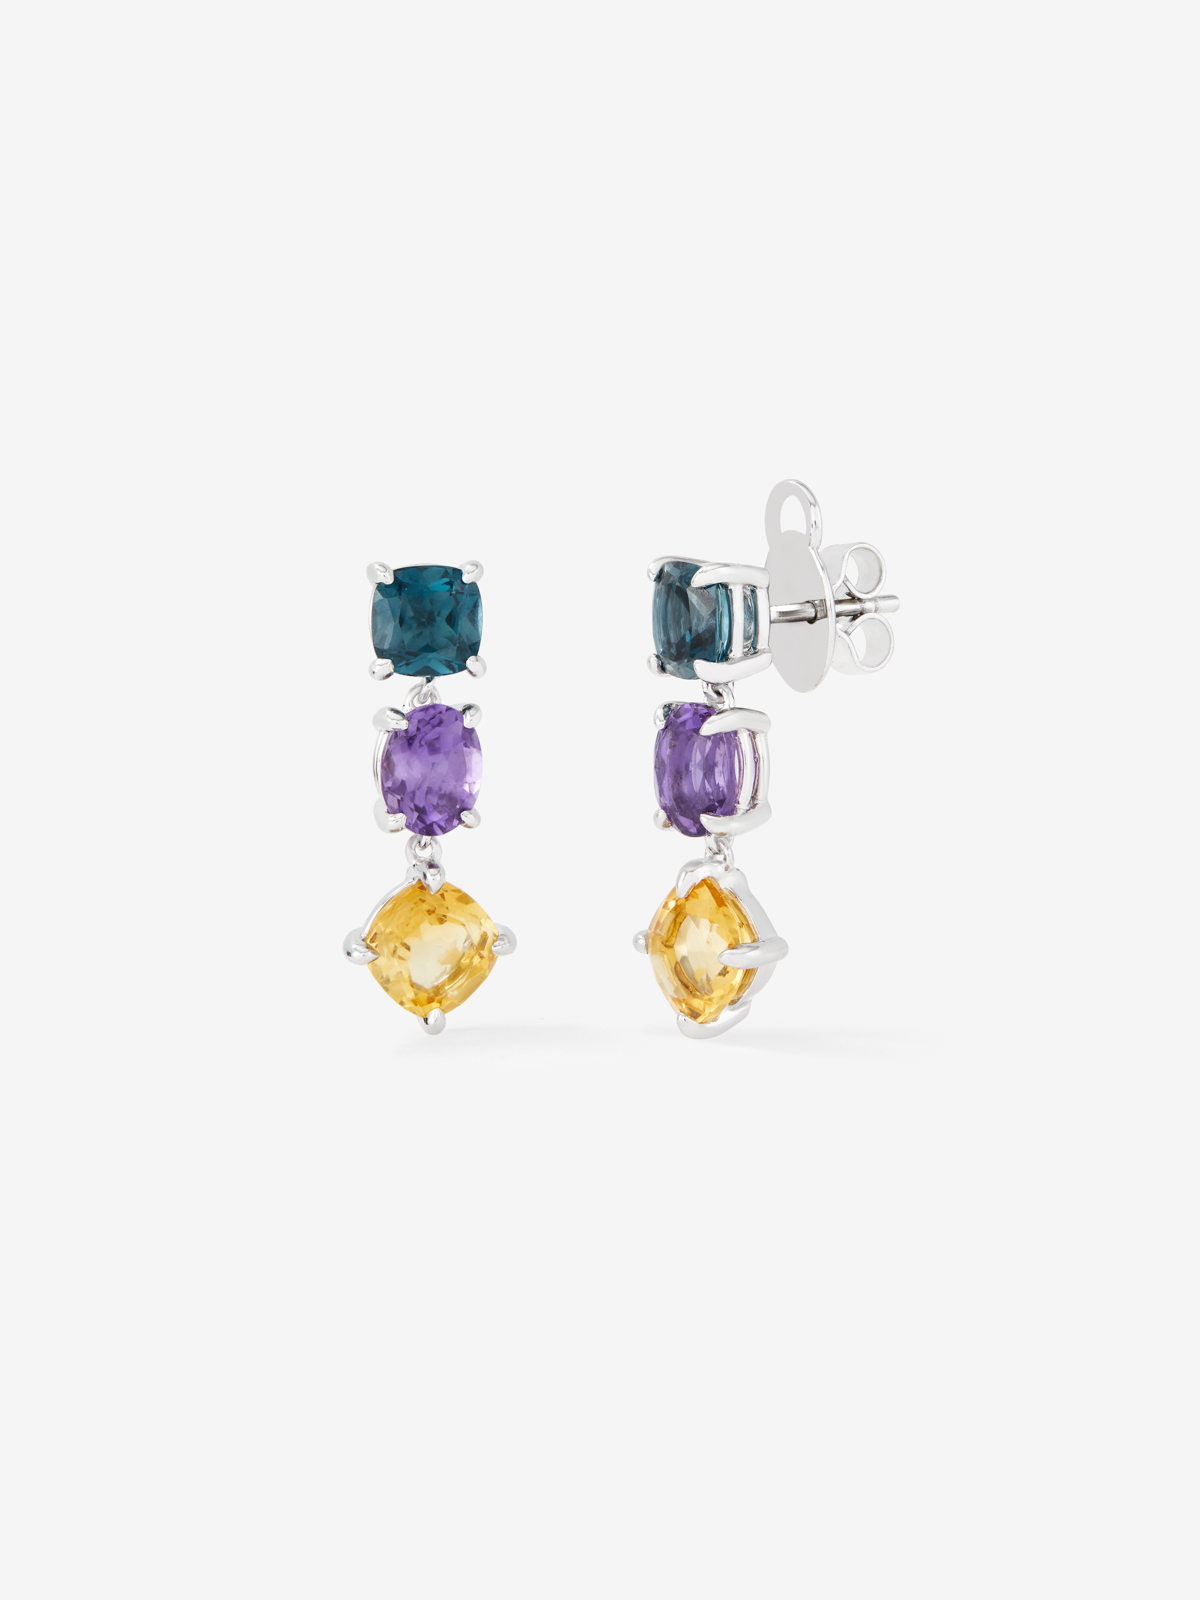 Long 925 silver earrings with topaz, amethyst, and citrine